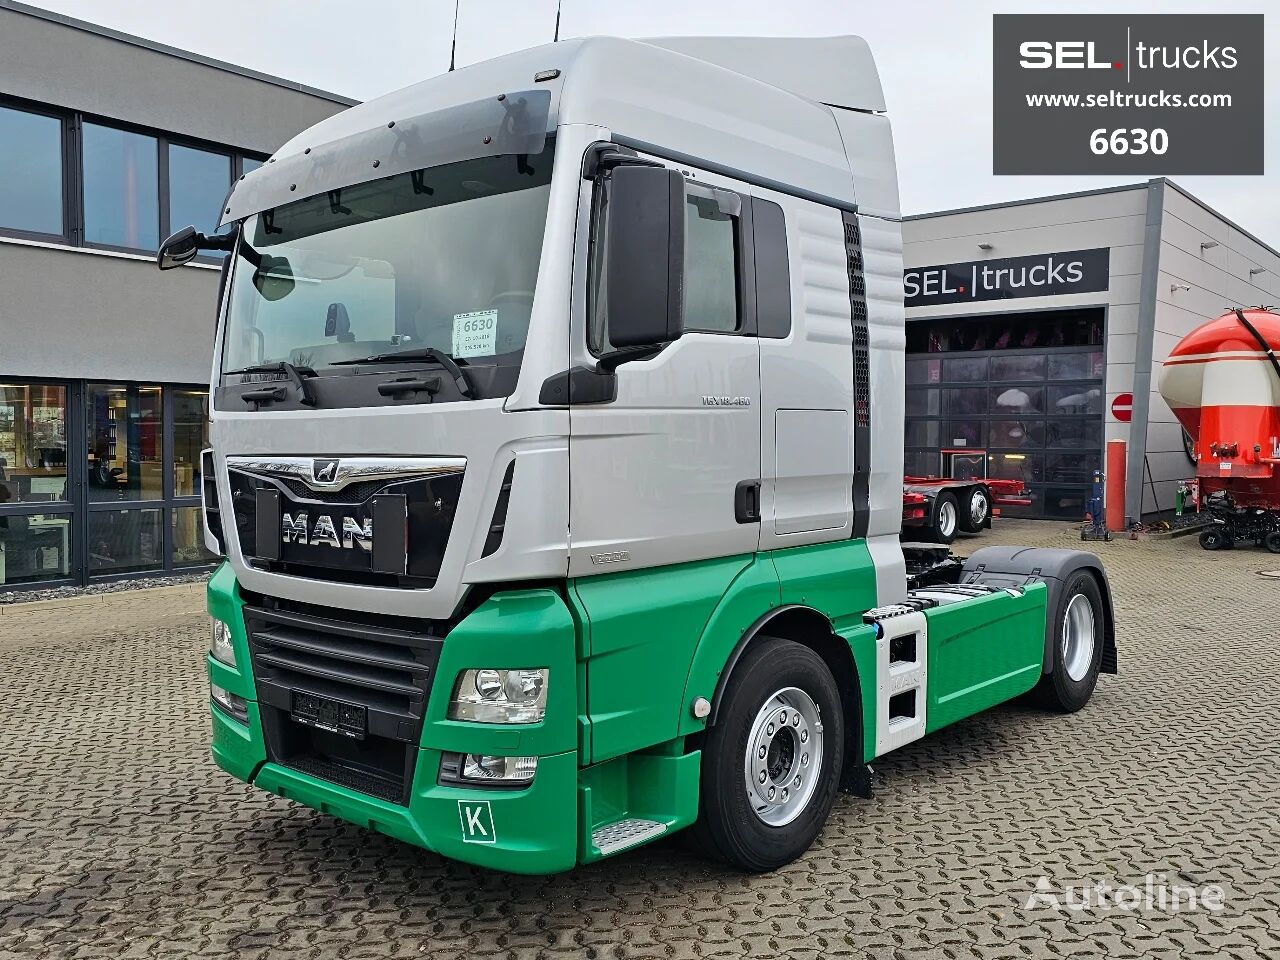 Man Tgx 18460 4x2 Bls Zf Intarder 2 Tanks Adr At Xenon Truck Tractor For Sale Germany 5442